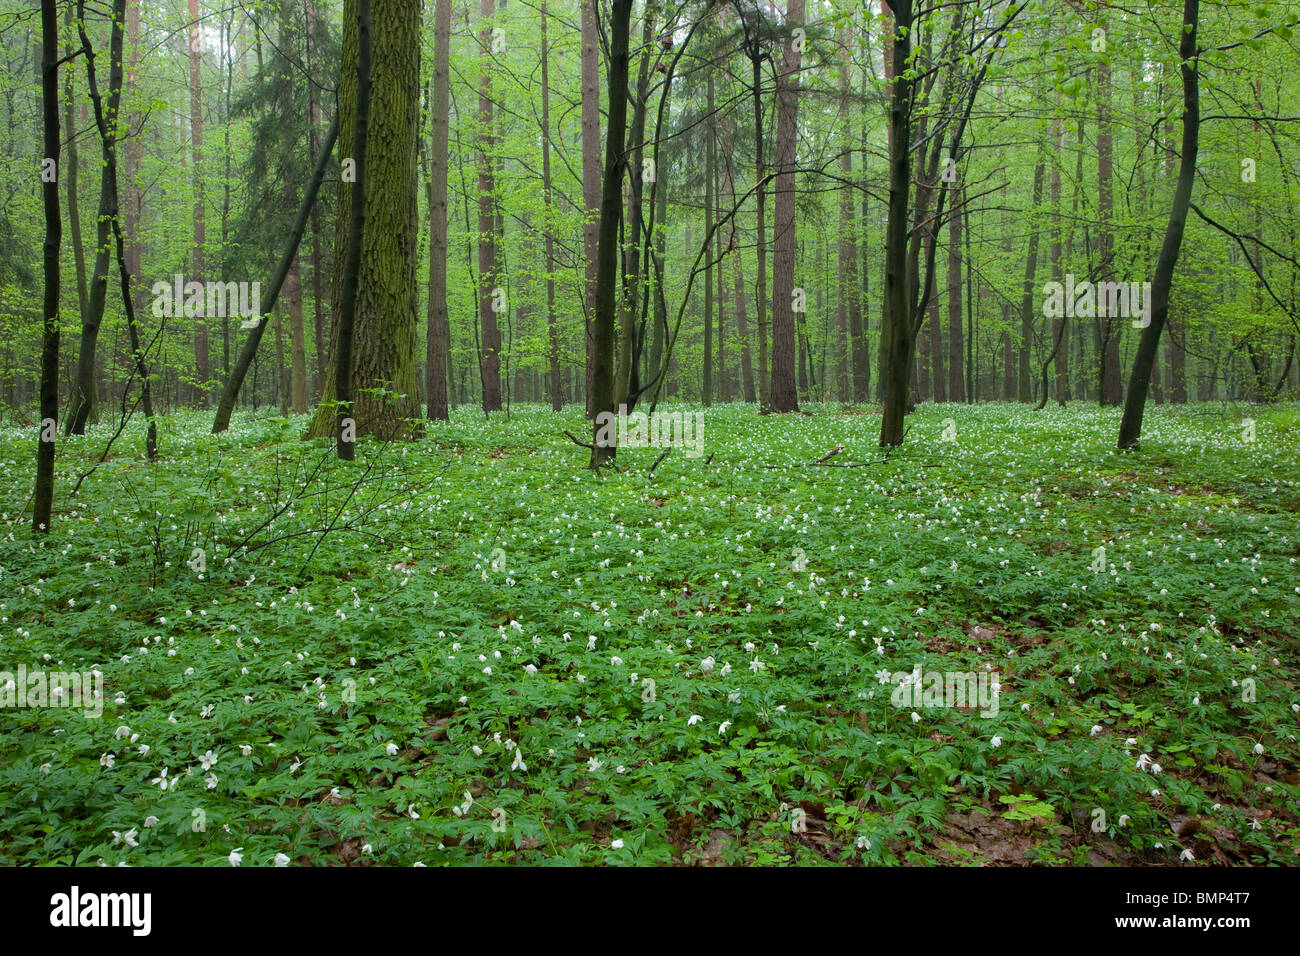 Floral bed of springtime anemone flowers in misty early morning Stock Photo